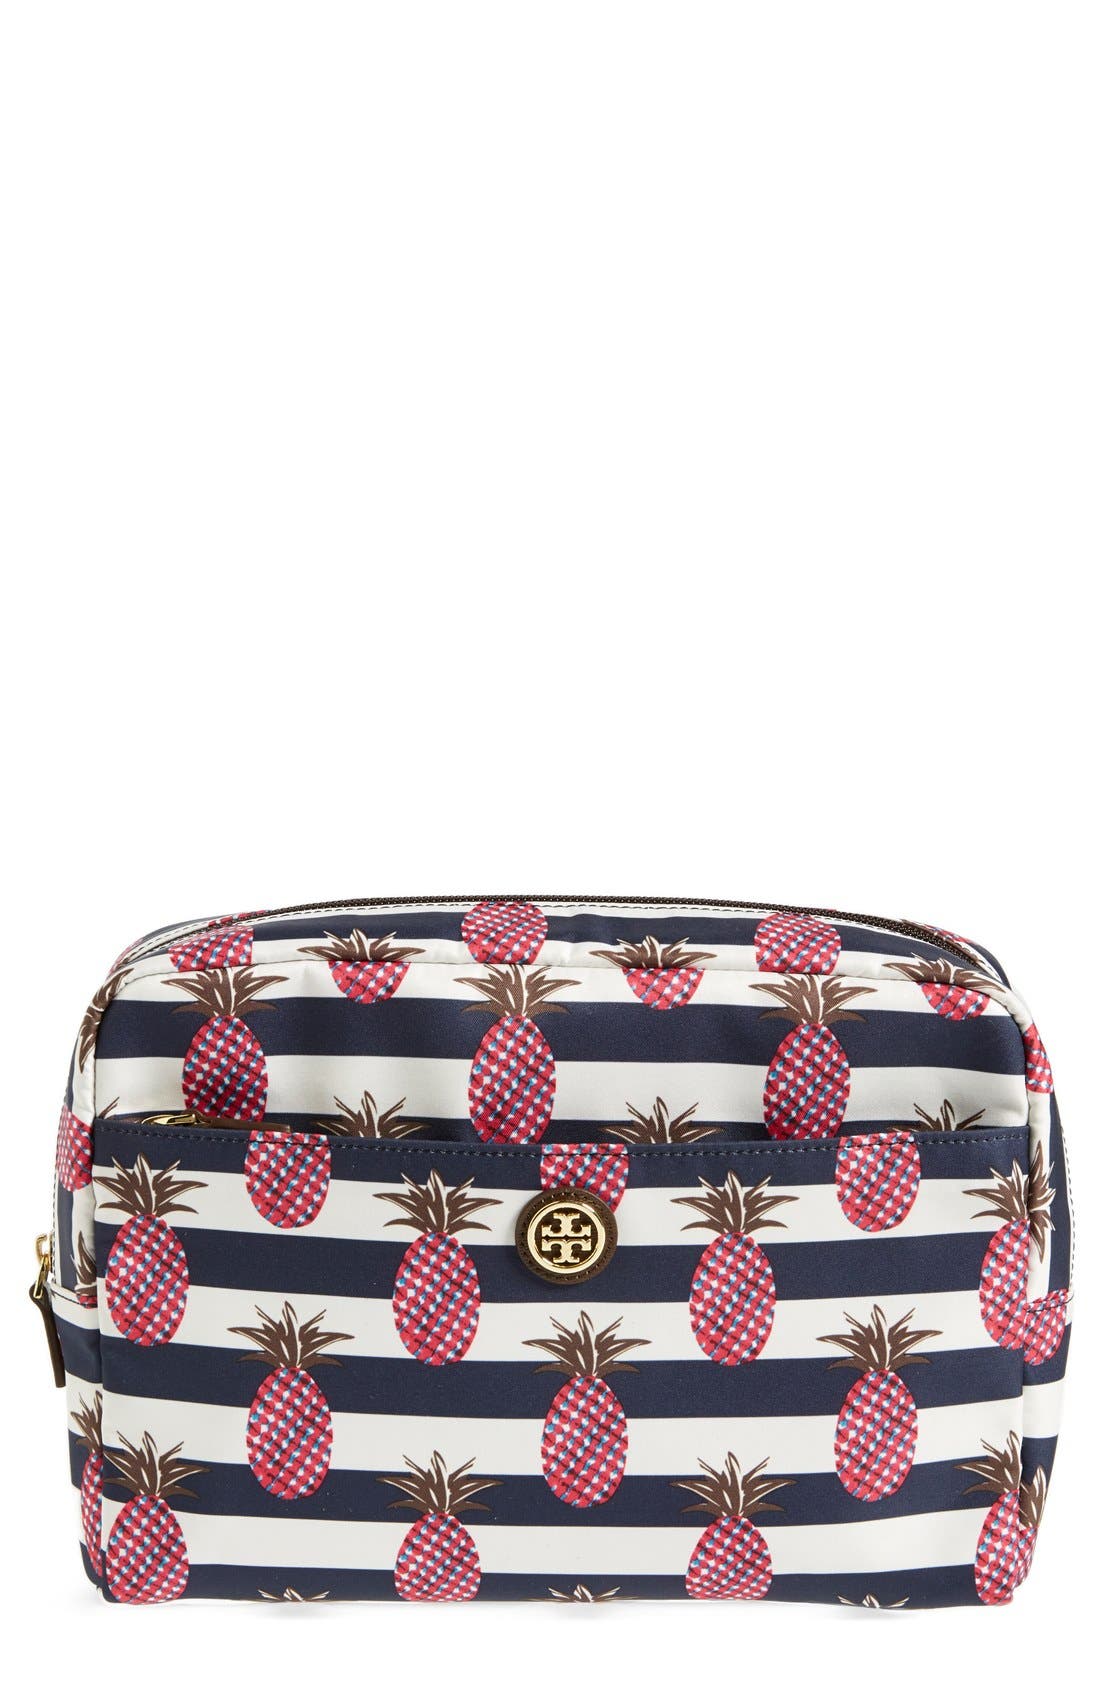 Tory Burch Cosmetic Bag Nordstrom La France, SAVE 47% 